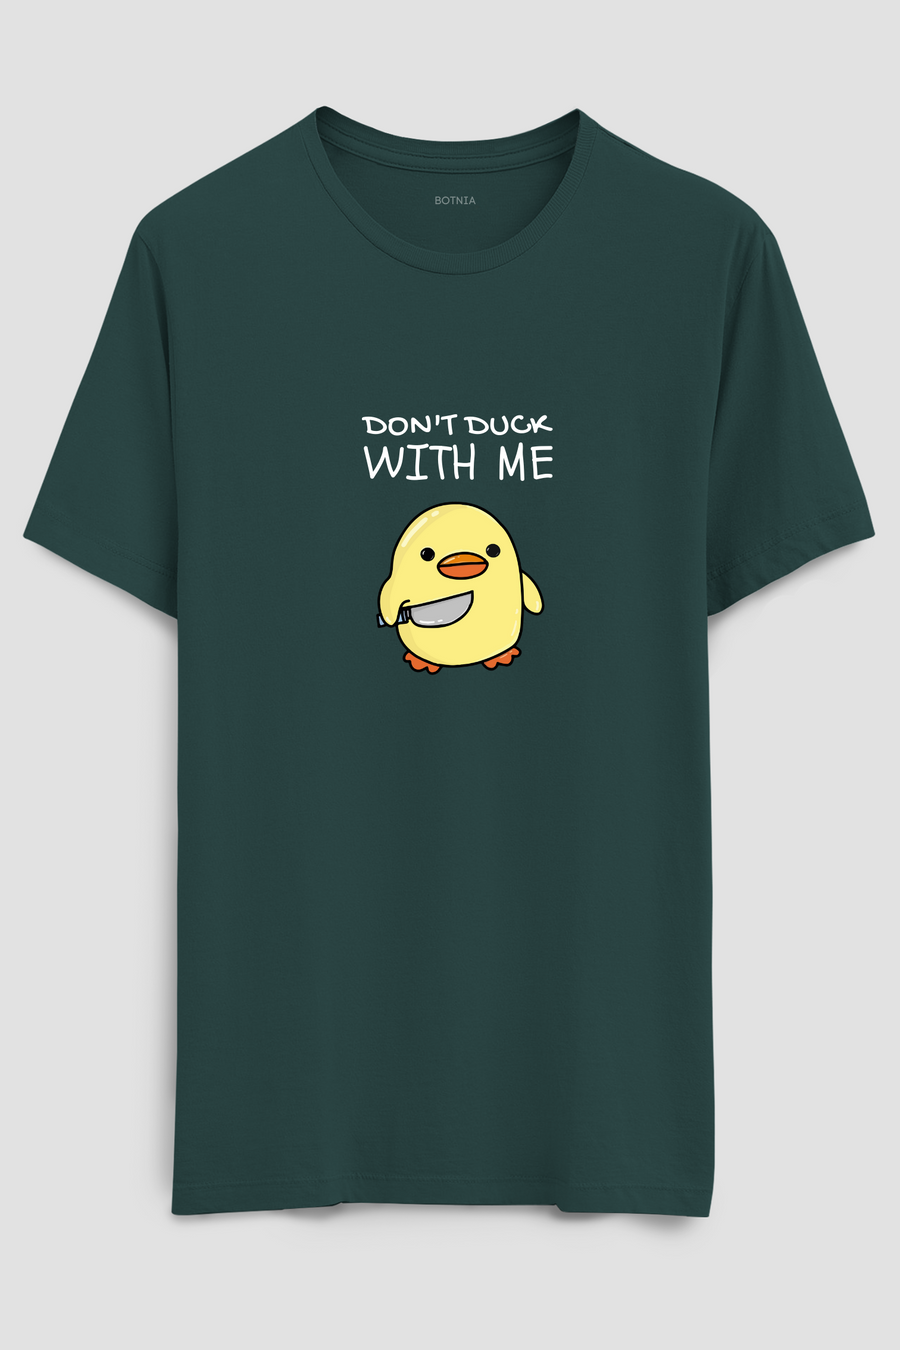 Don't duck with me- Half sleeve t-shirt